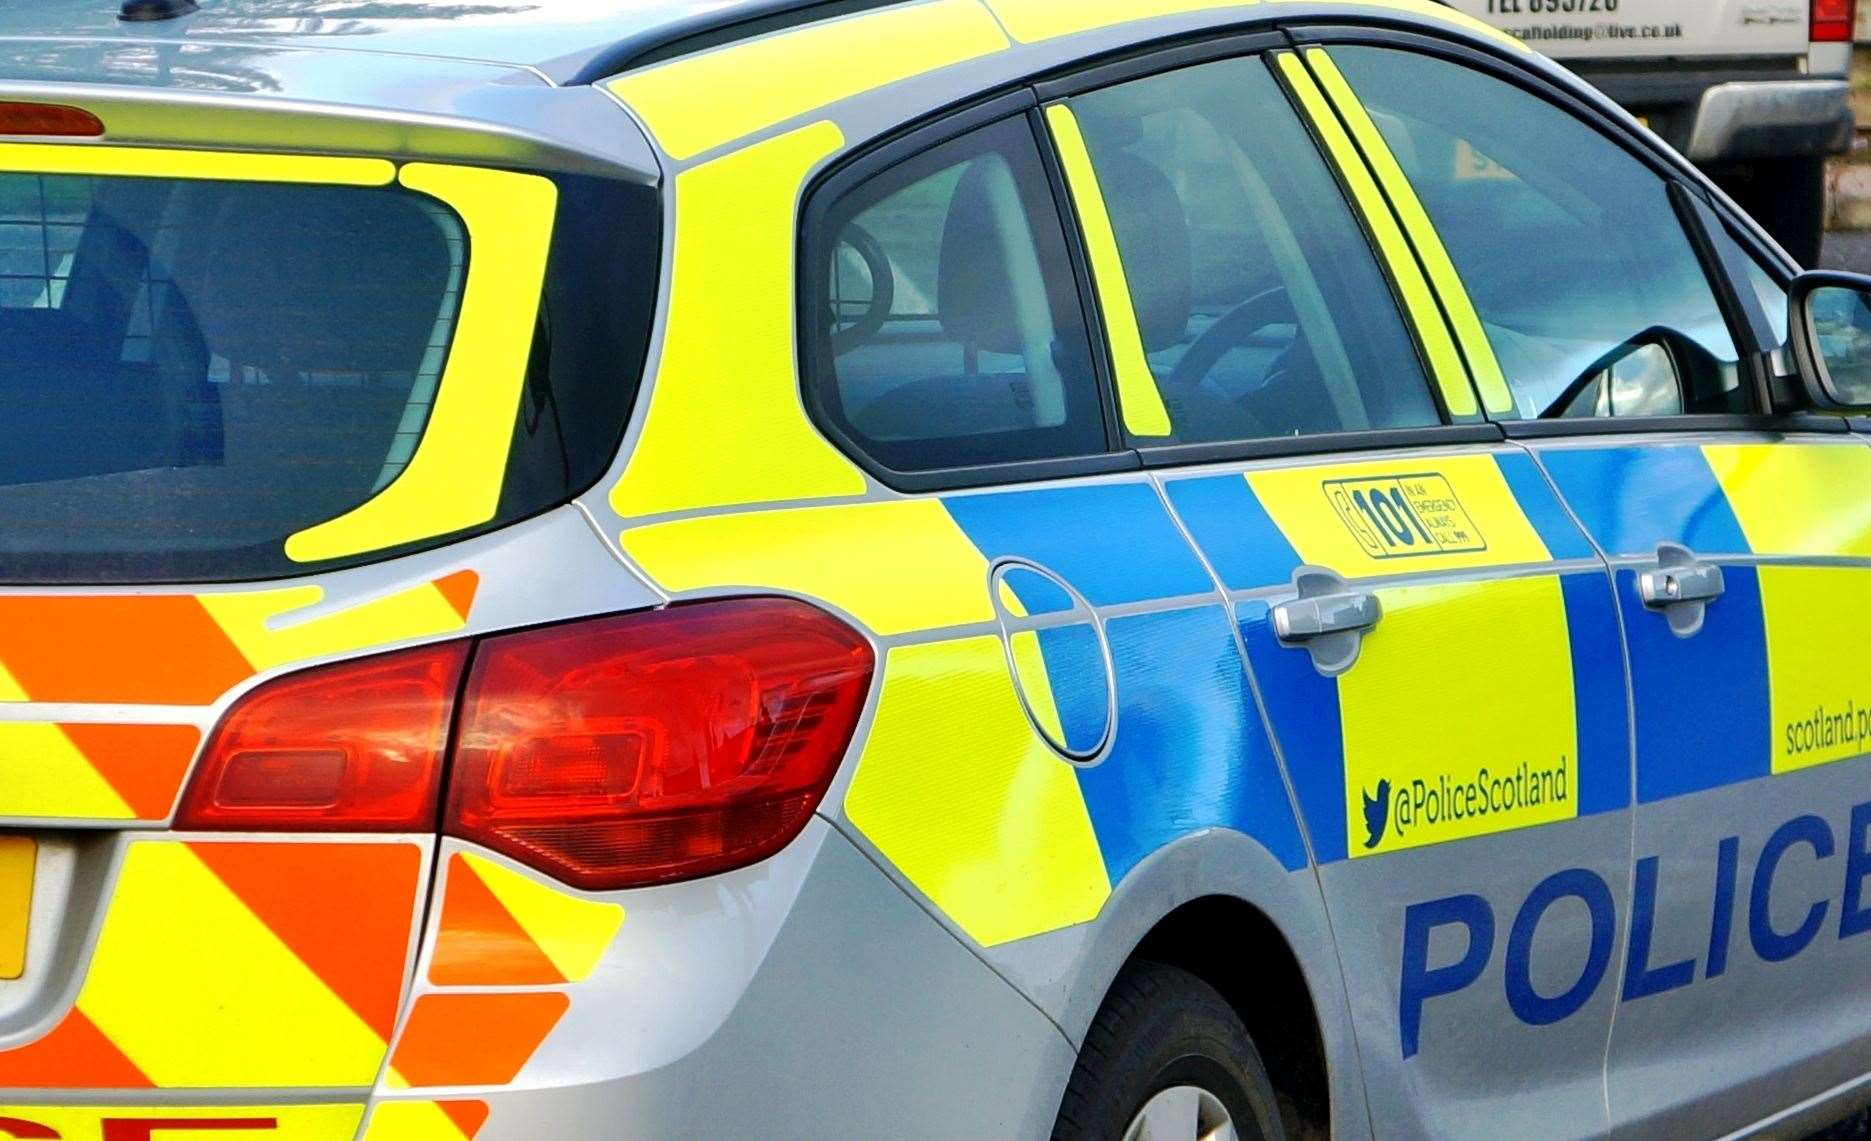 Police were called to a report of a one-car road crash on the A882 today.